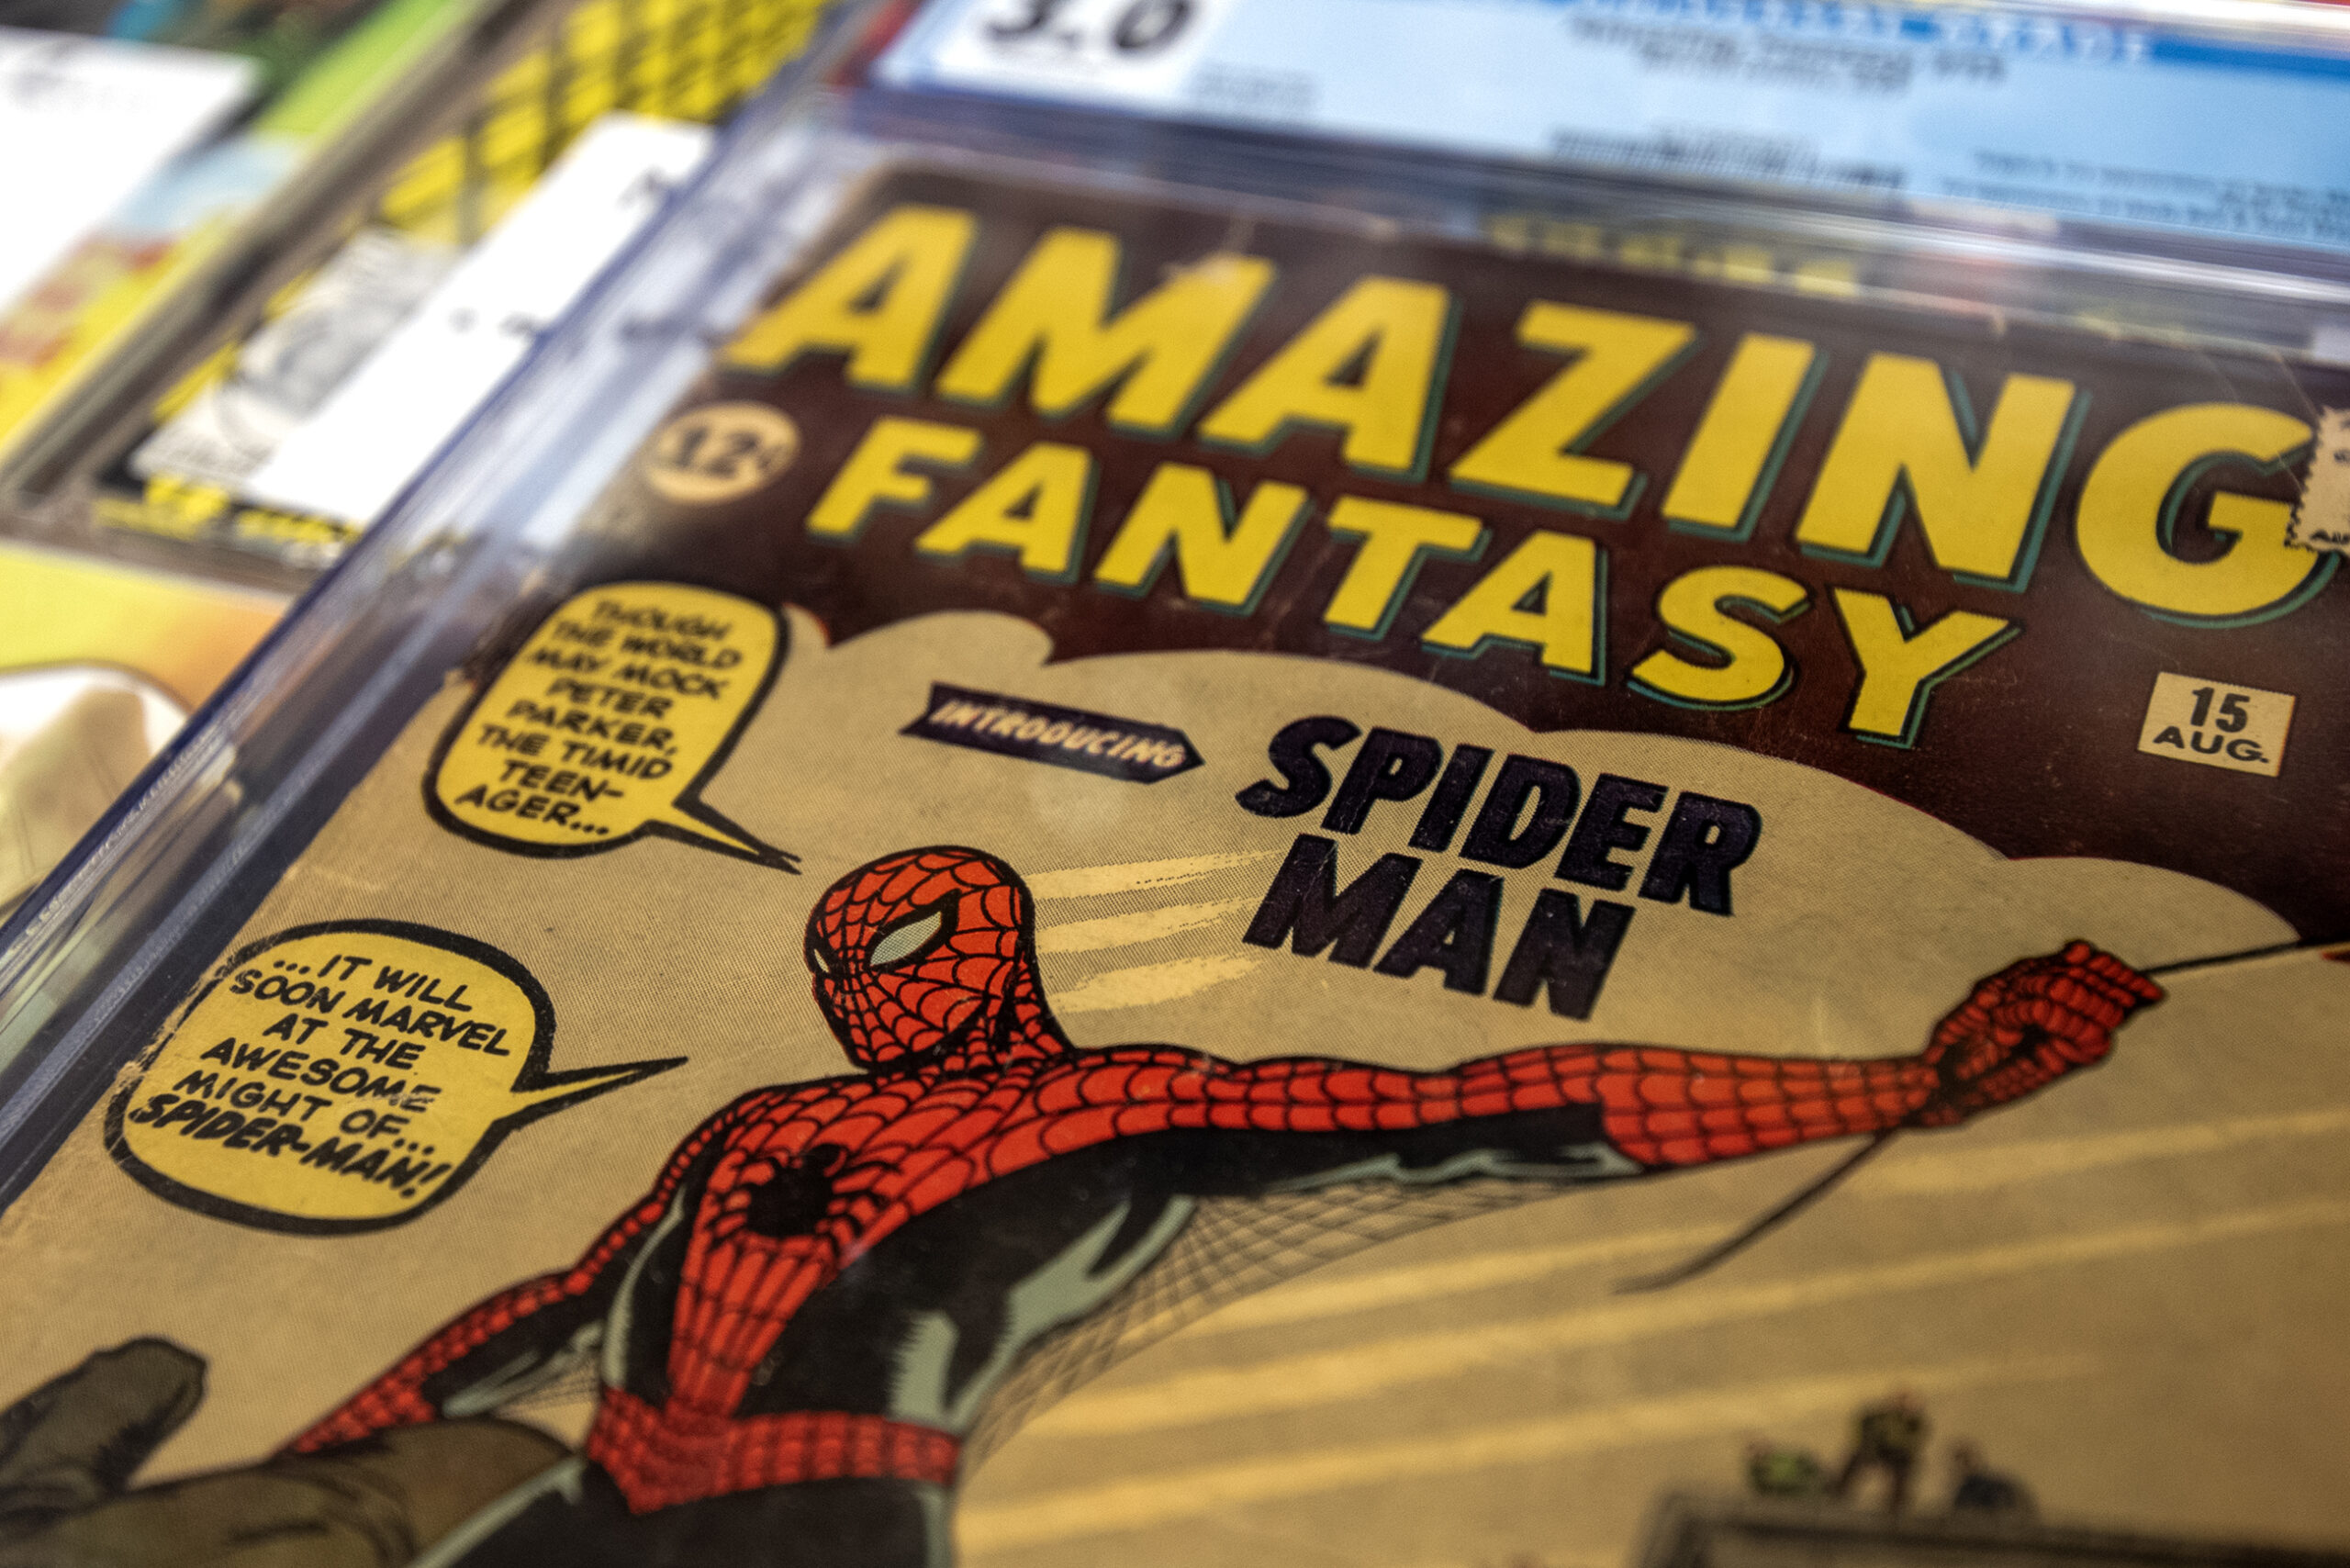 Spiderman can be seen on the cover of a rare comic book.